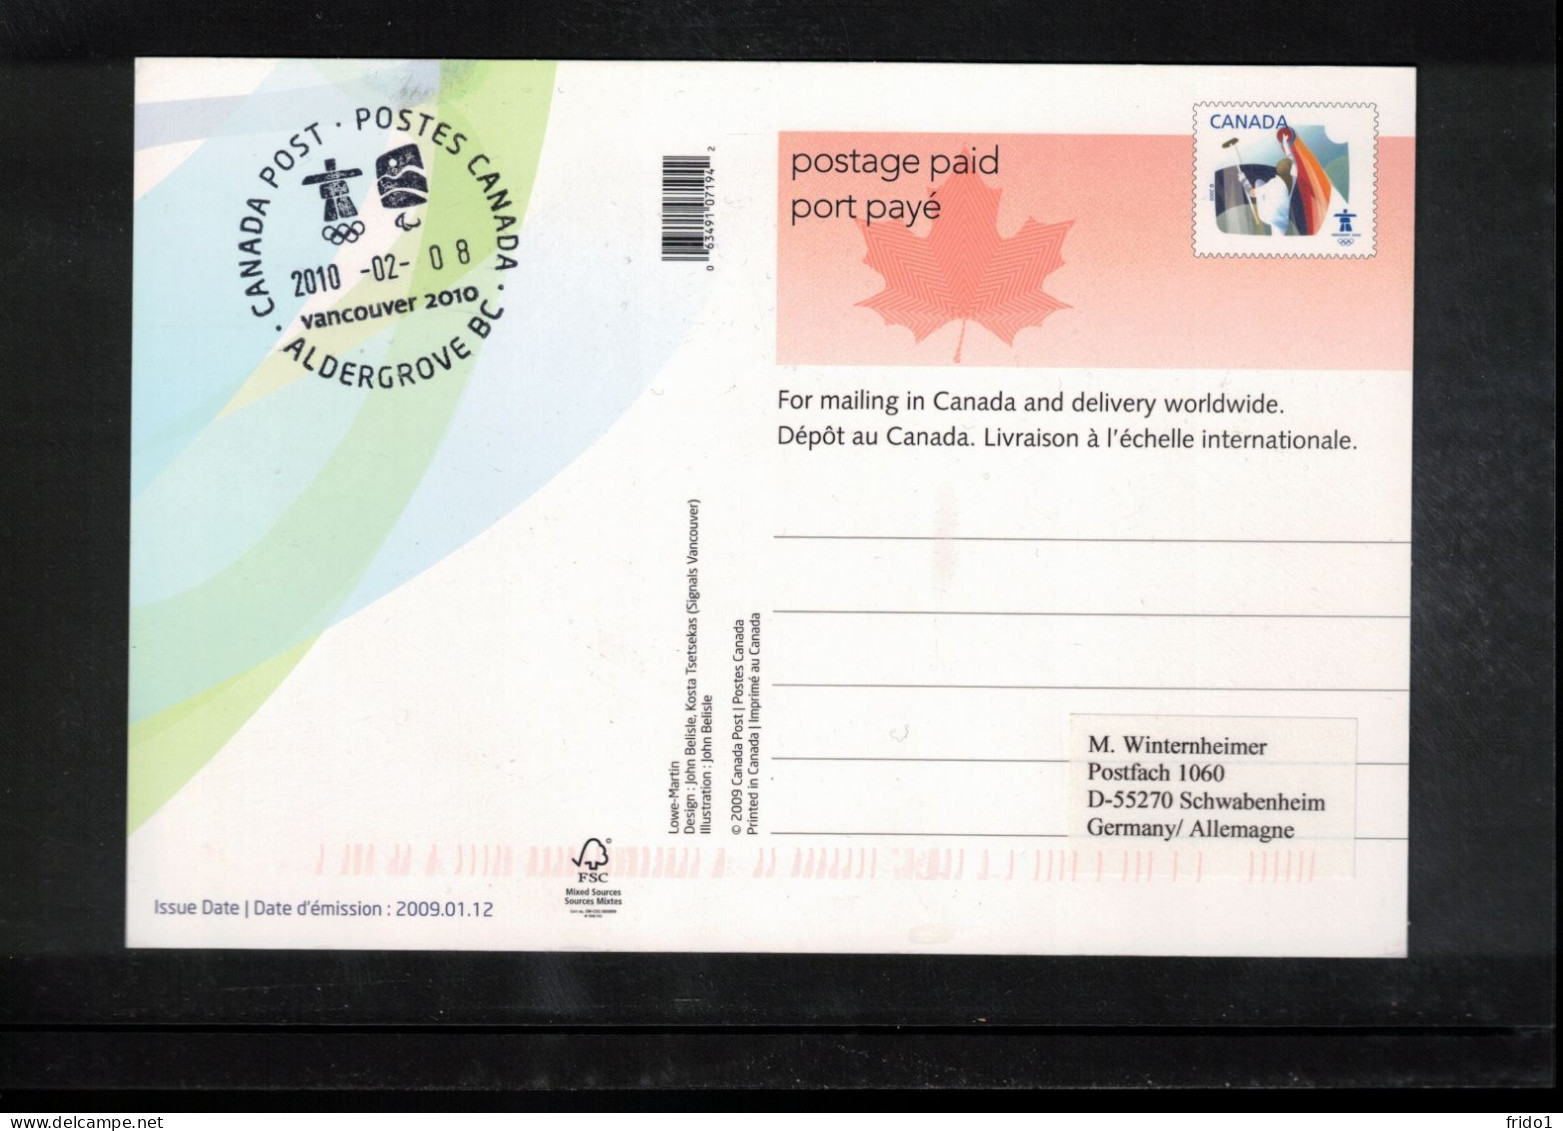 Canada 2010 Olympic Games Vancouver - ALDERGROVE BC Postmark Interesting Postcard - Inverno2010: Vancouver